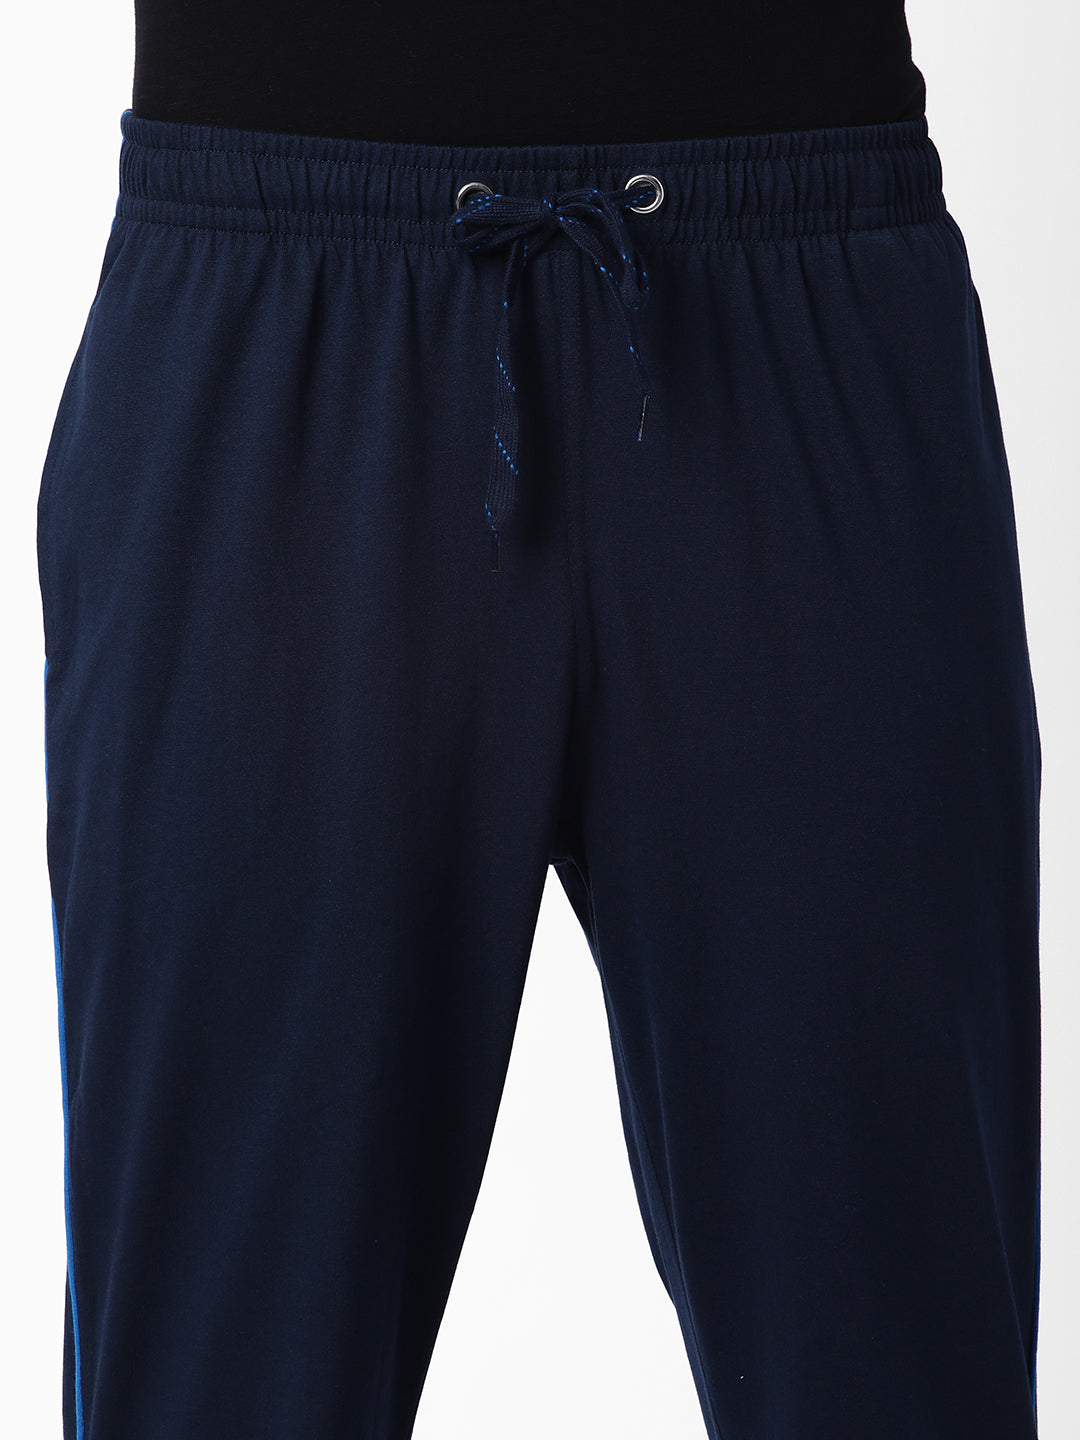 Cotstyle Men's Super Combed Cotton Regular-Fit Track Pants with Side Pocket, Colour Navy-Style no.TP1101